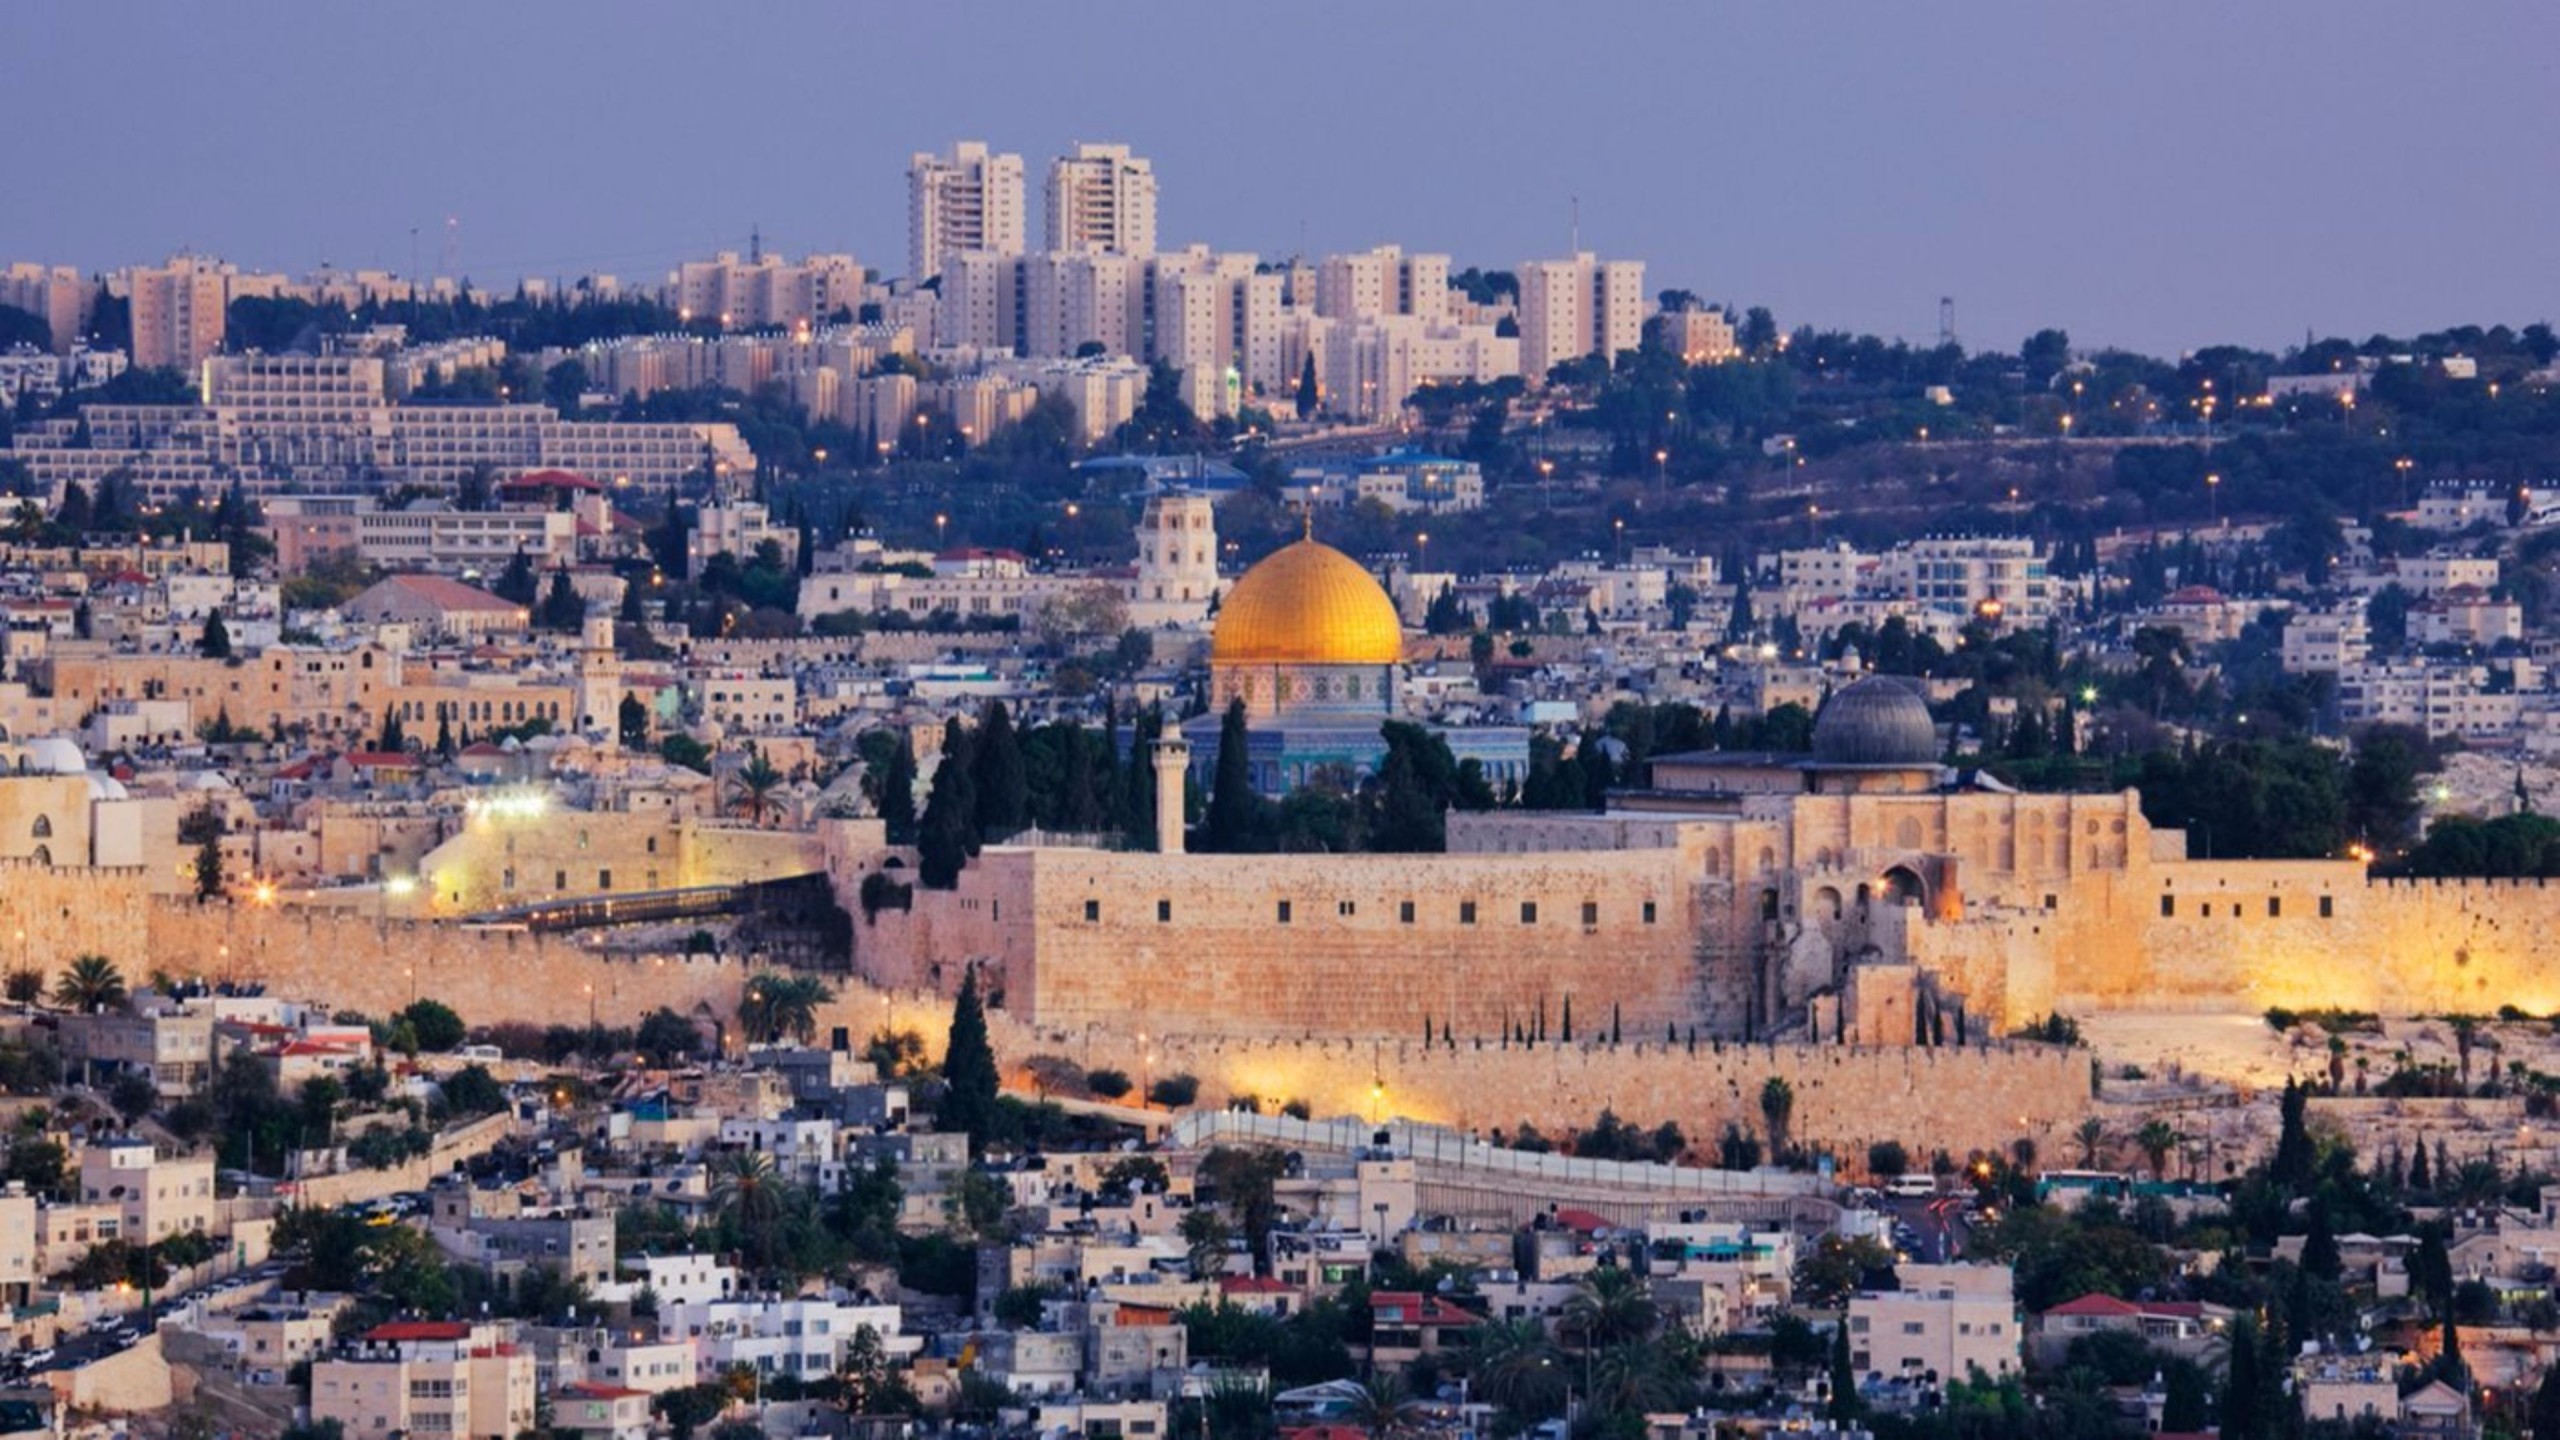 2560x1440 jerusalem israel hd wallpaper - Background Wallpapers for your .